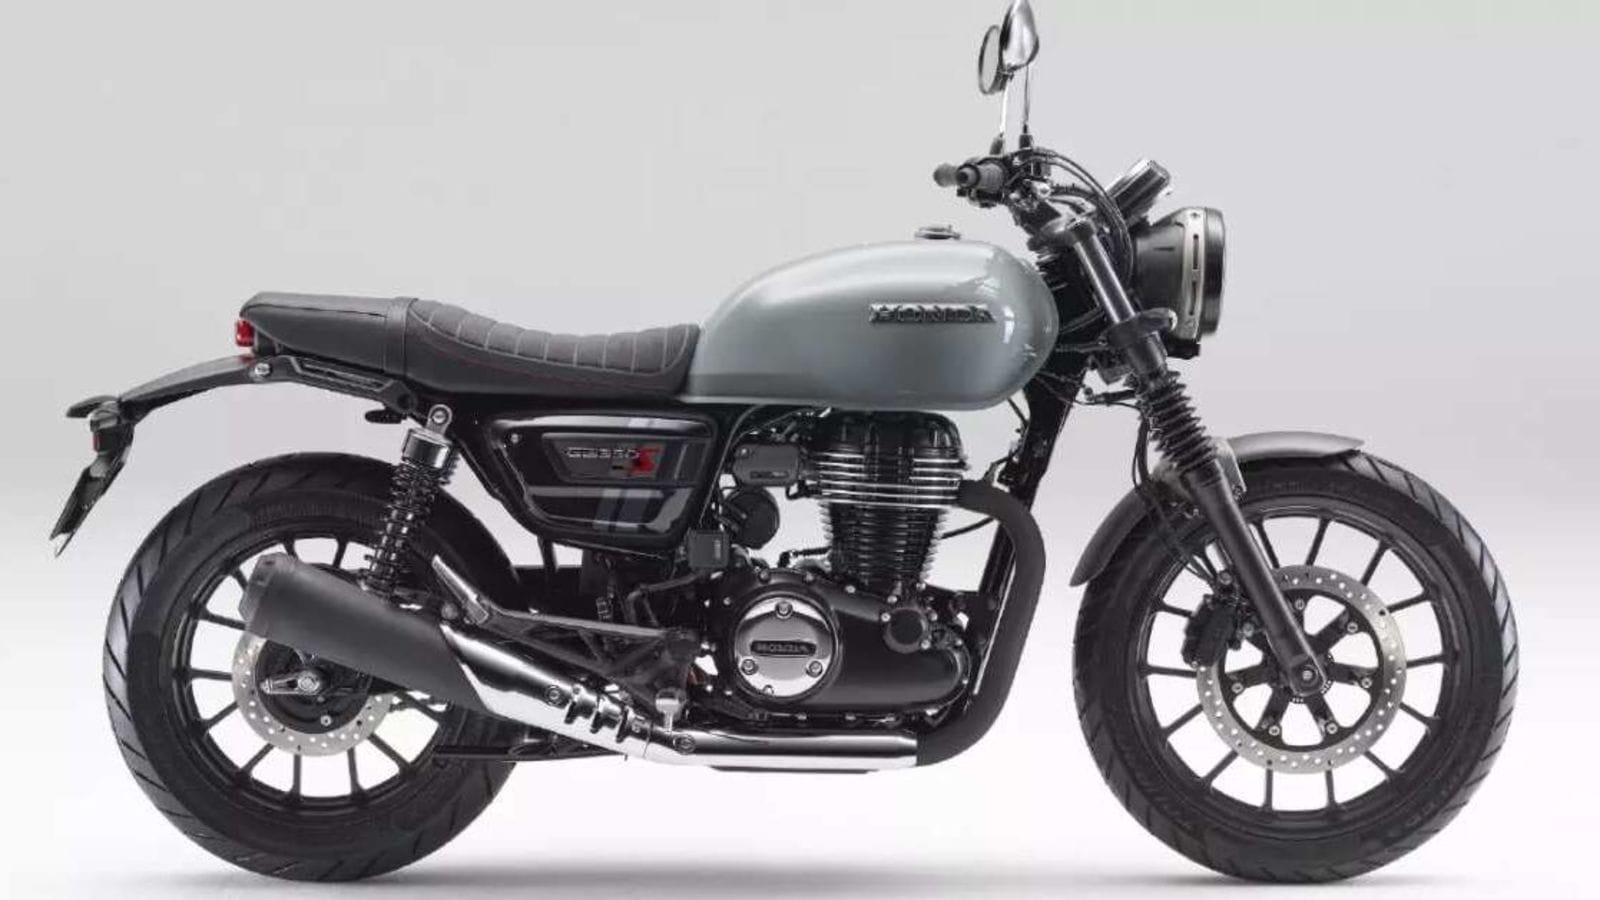 Honda CB 350 RS gets new colours and name in Japan HT Auto